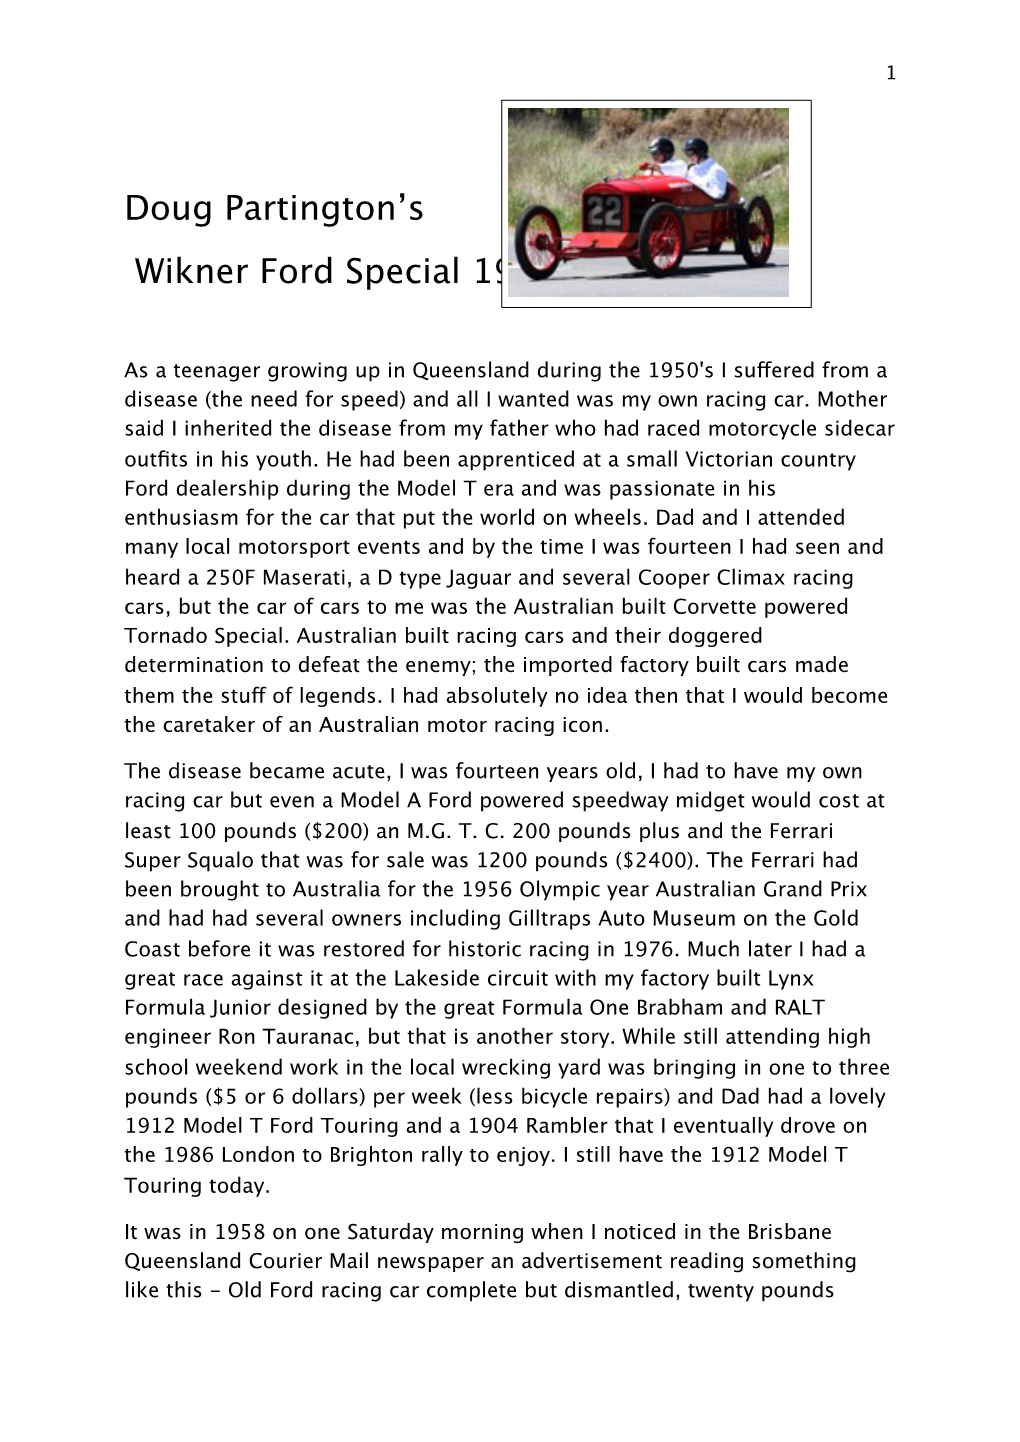 The Wikner Ford Special 1922 Story